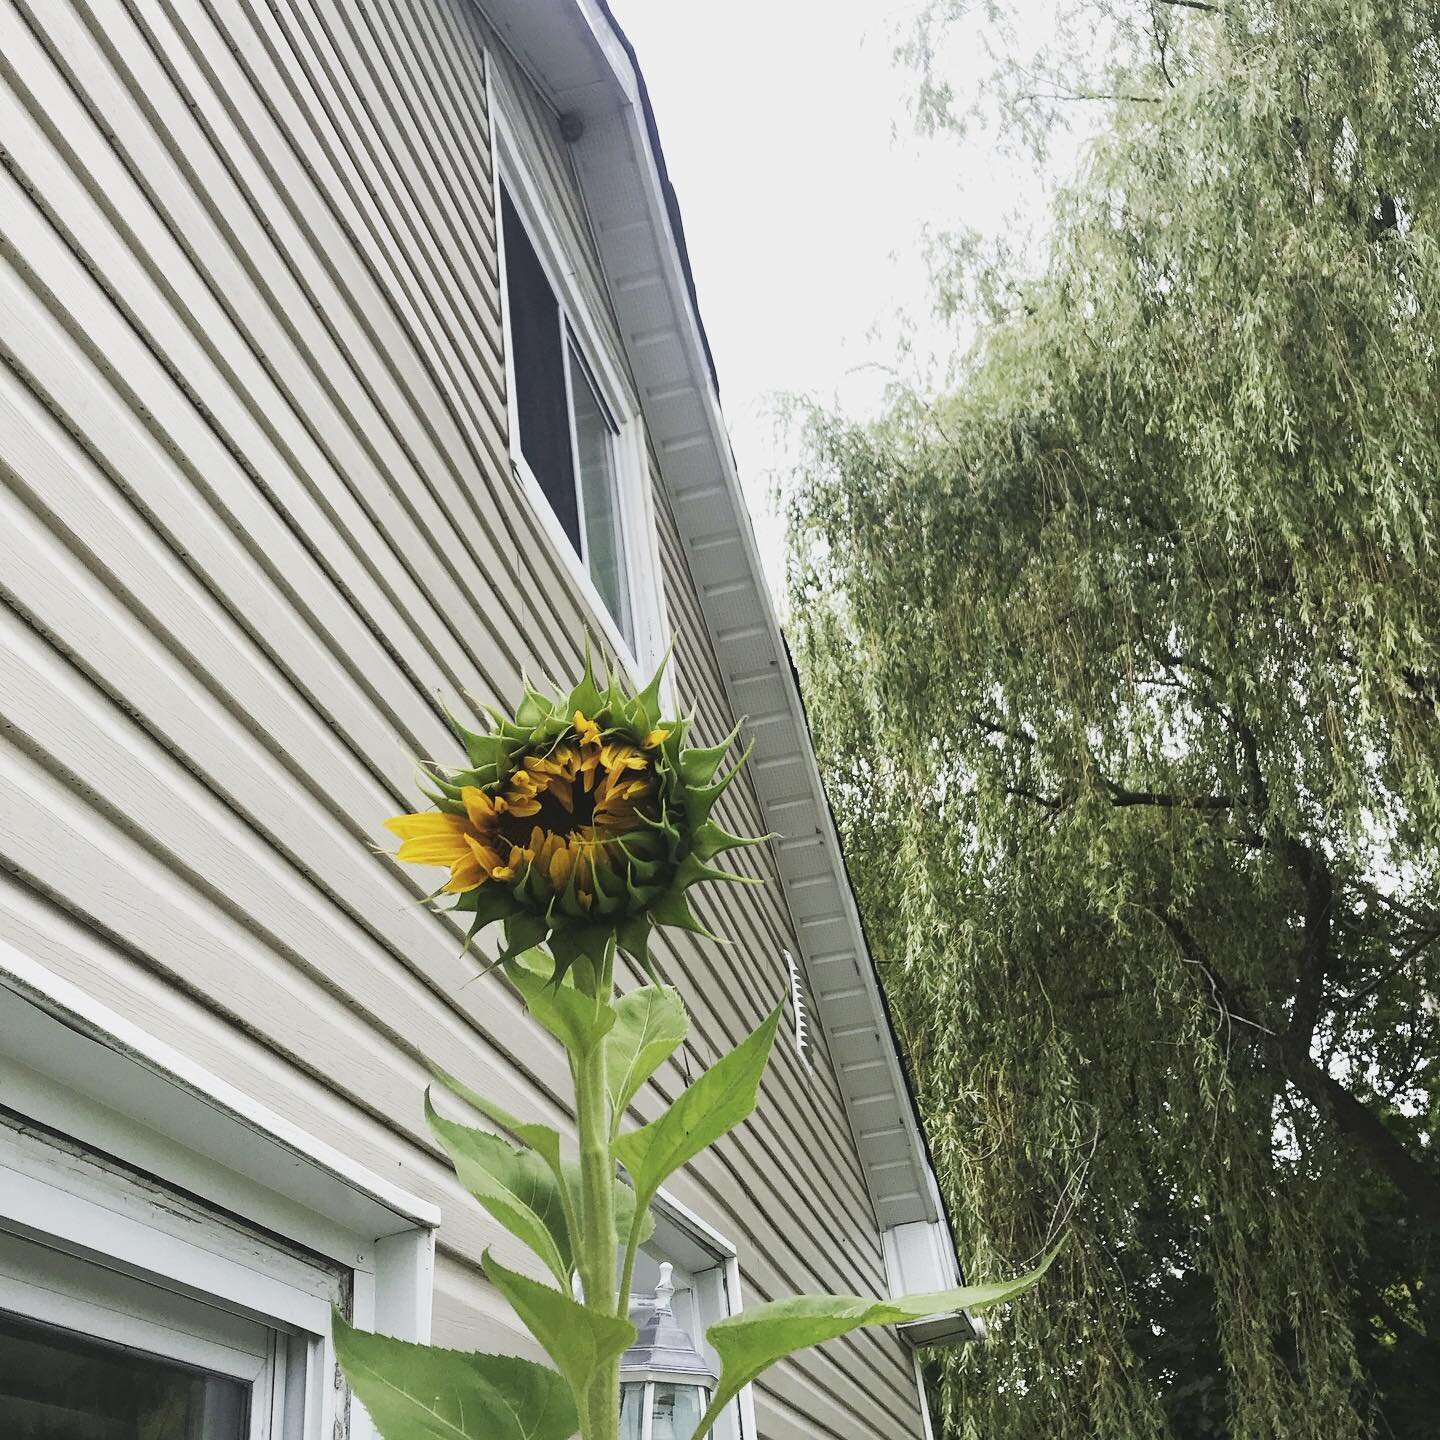 I&rsquo;ve been asking myself what it might mean that our sunflowers seem to be blooming so late. Blooming at the same time we&rsquo;re leaving the place we rooted them in. The beauty. The heartbreak. A welcoming. A goodbye. All in one. I had thought